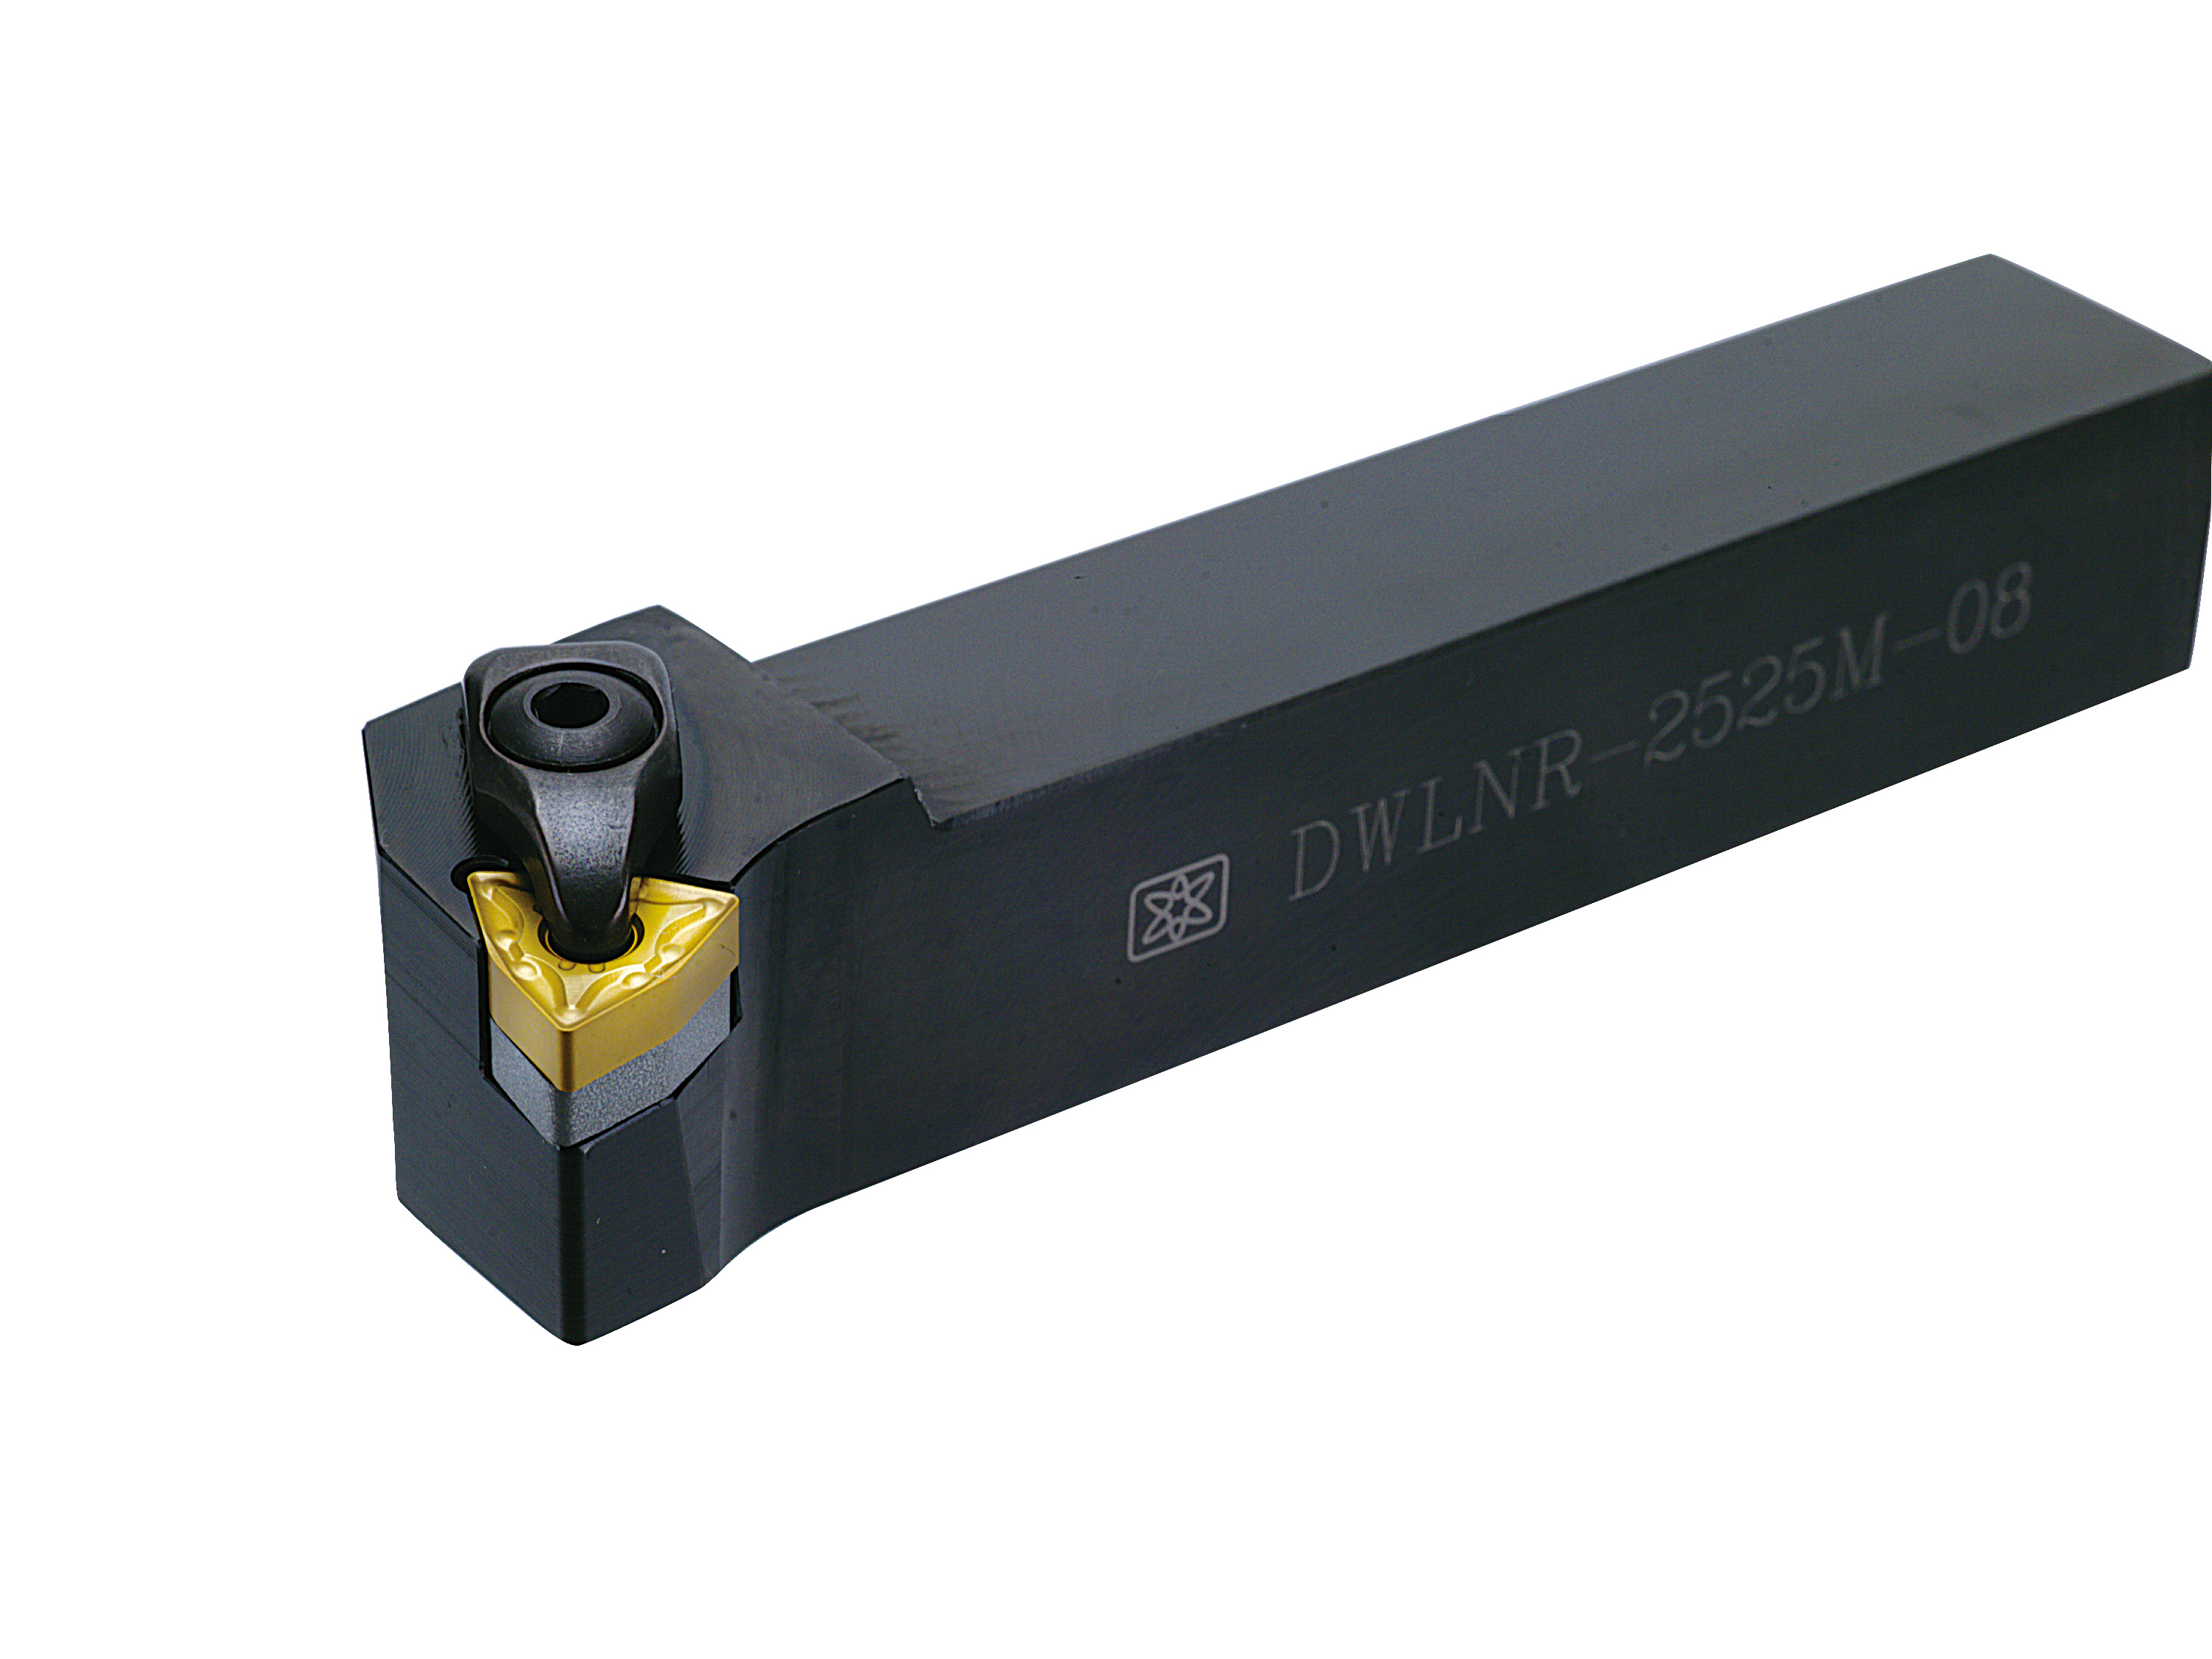 Products|DWLNR (WNMG0804) External Turning Tool Holders